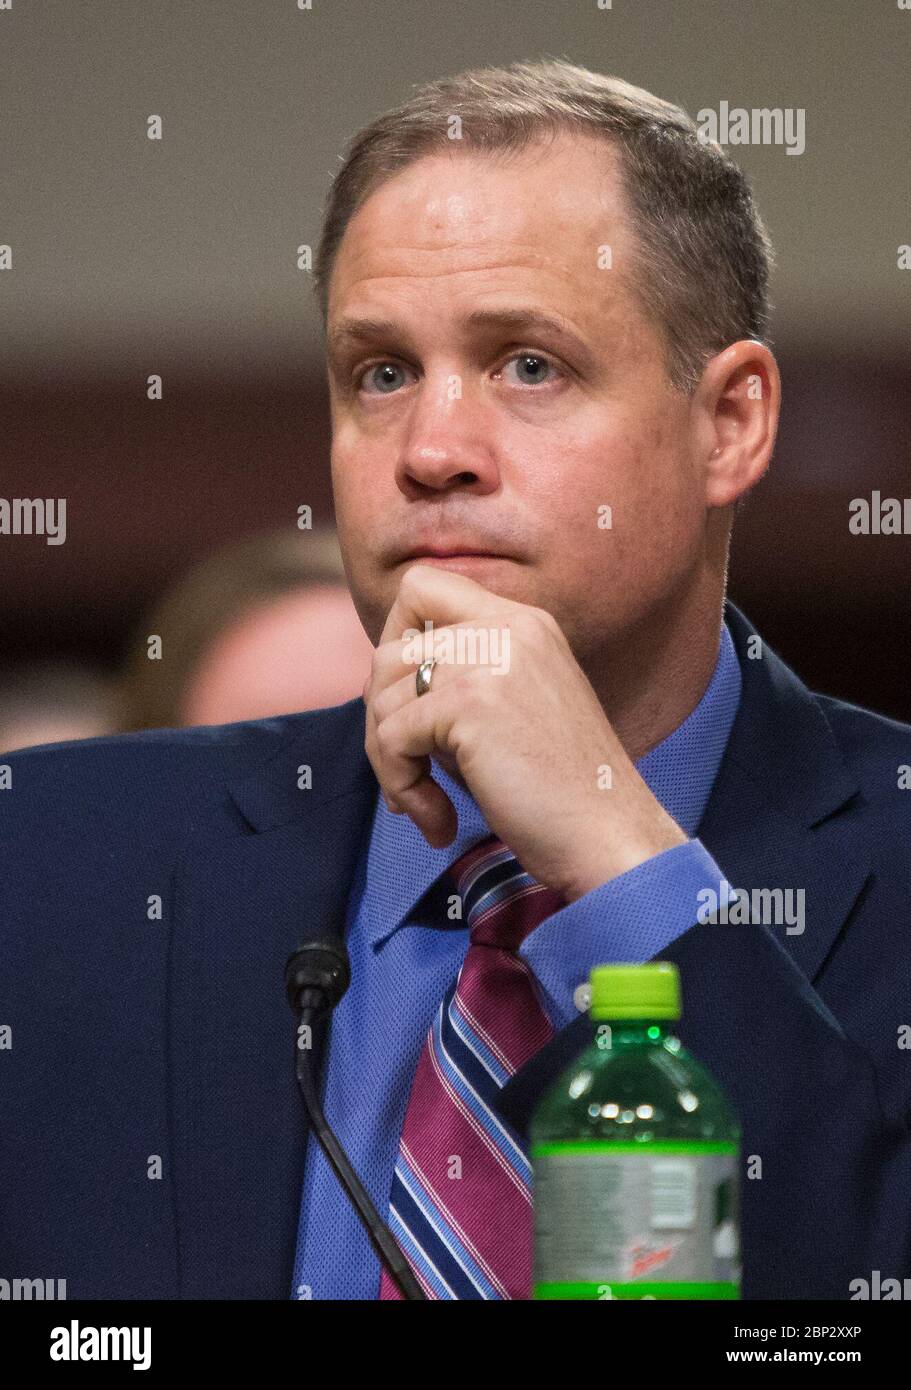 Senate Committee on Commerce, Science, and Transportation Hearing  NASA Administrator Jim Bridenstine is seen during a hearing of the Senate Committee on Commerce, Science, and Transportation titled &quot;The New Space Race: Ensuring U.S. Global Leadership on the Final Frontier,&quot; Wednesday, March 13, 2019 at the Dirksen Senate Office Building in Washington. Stock Photo